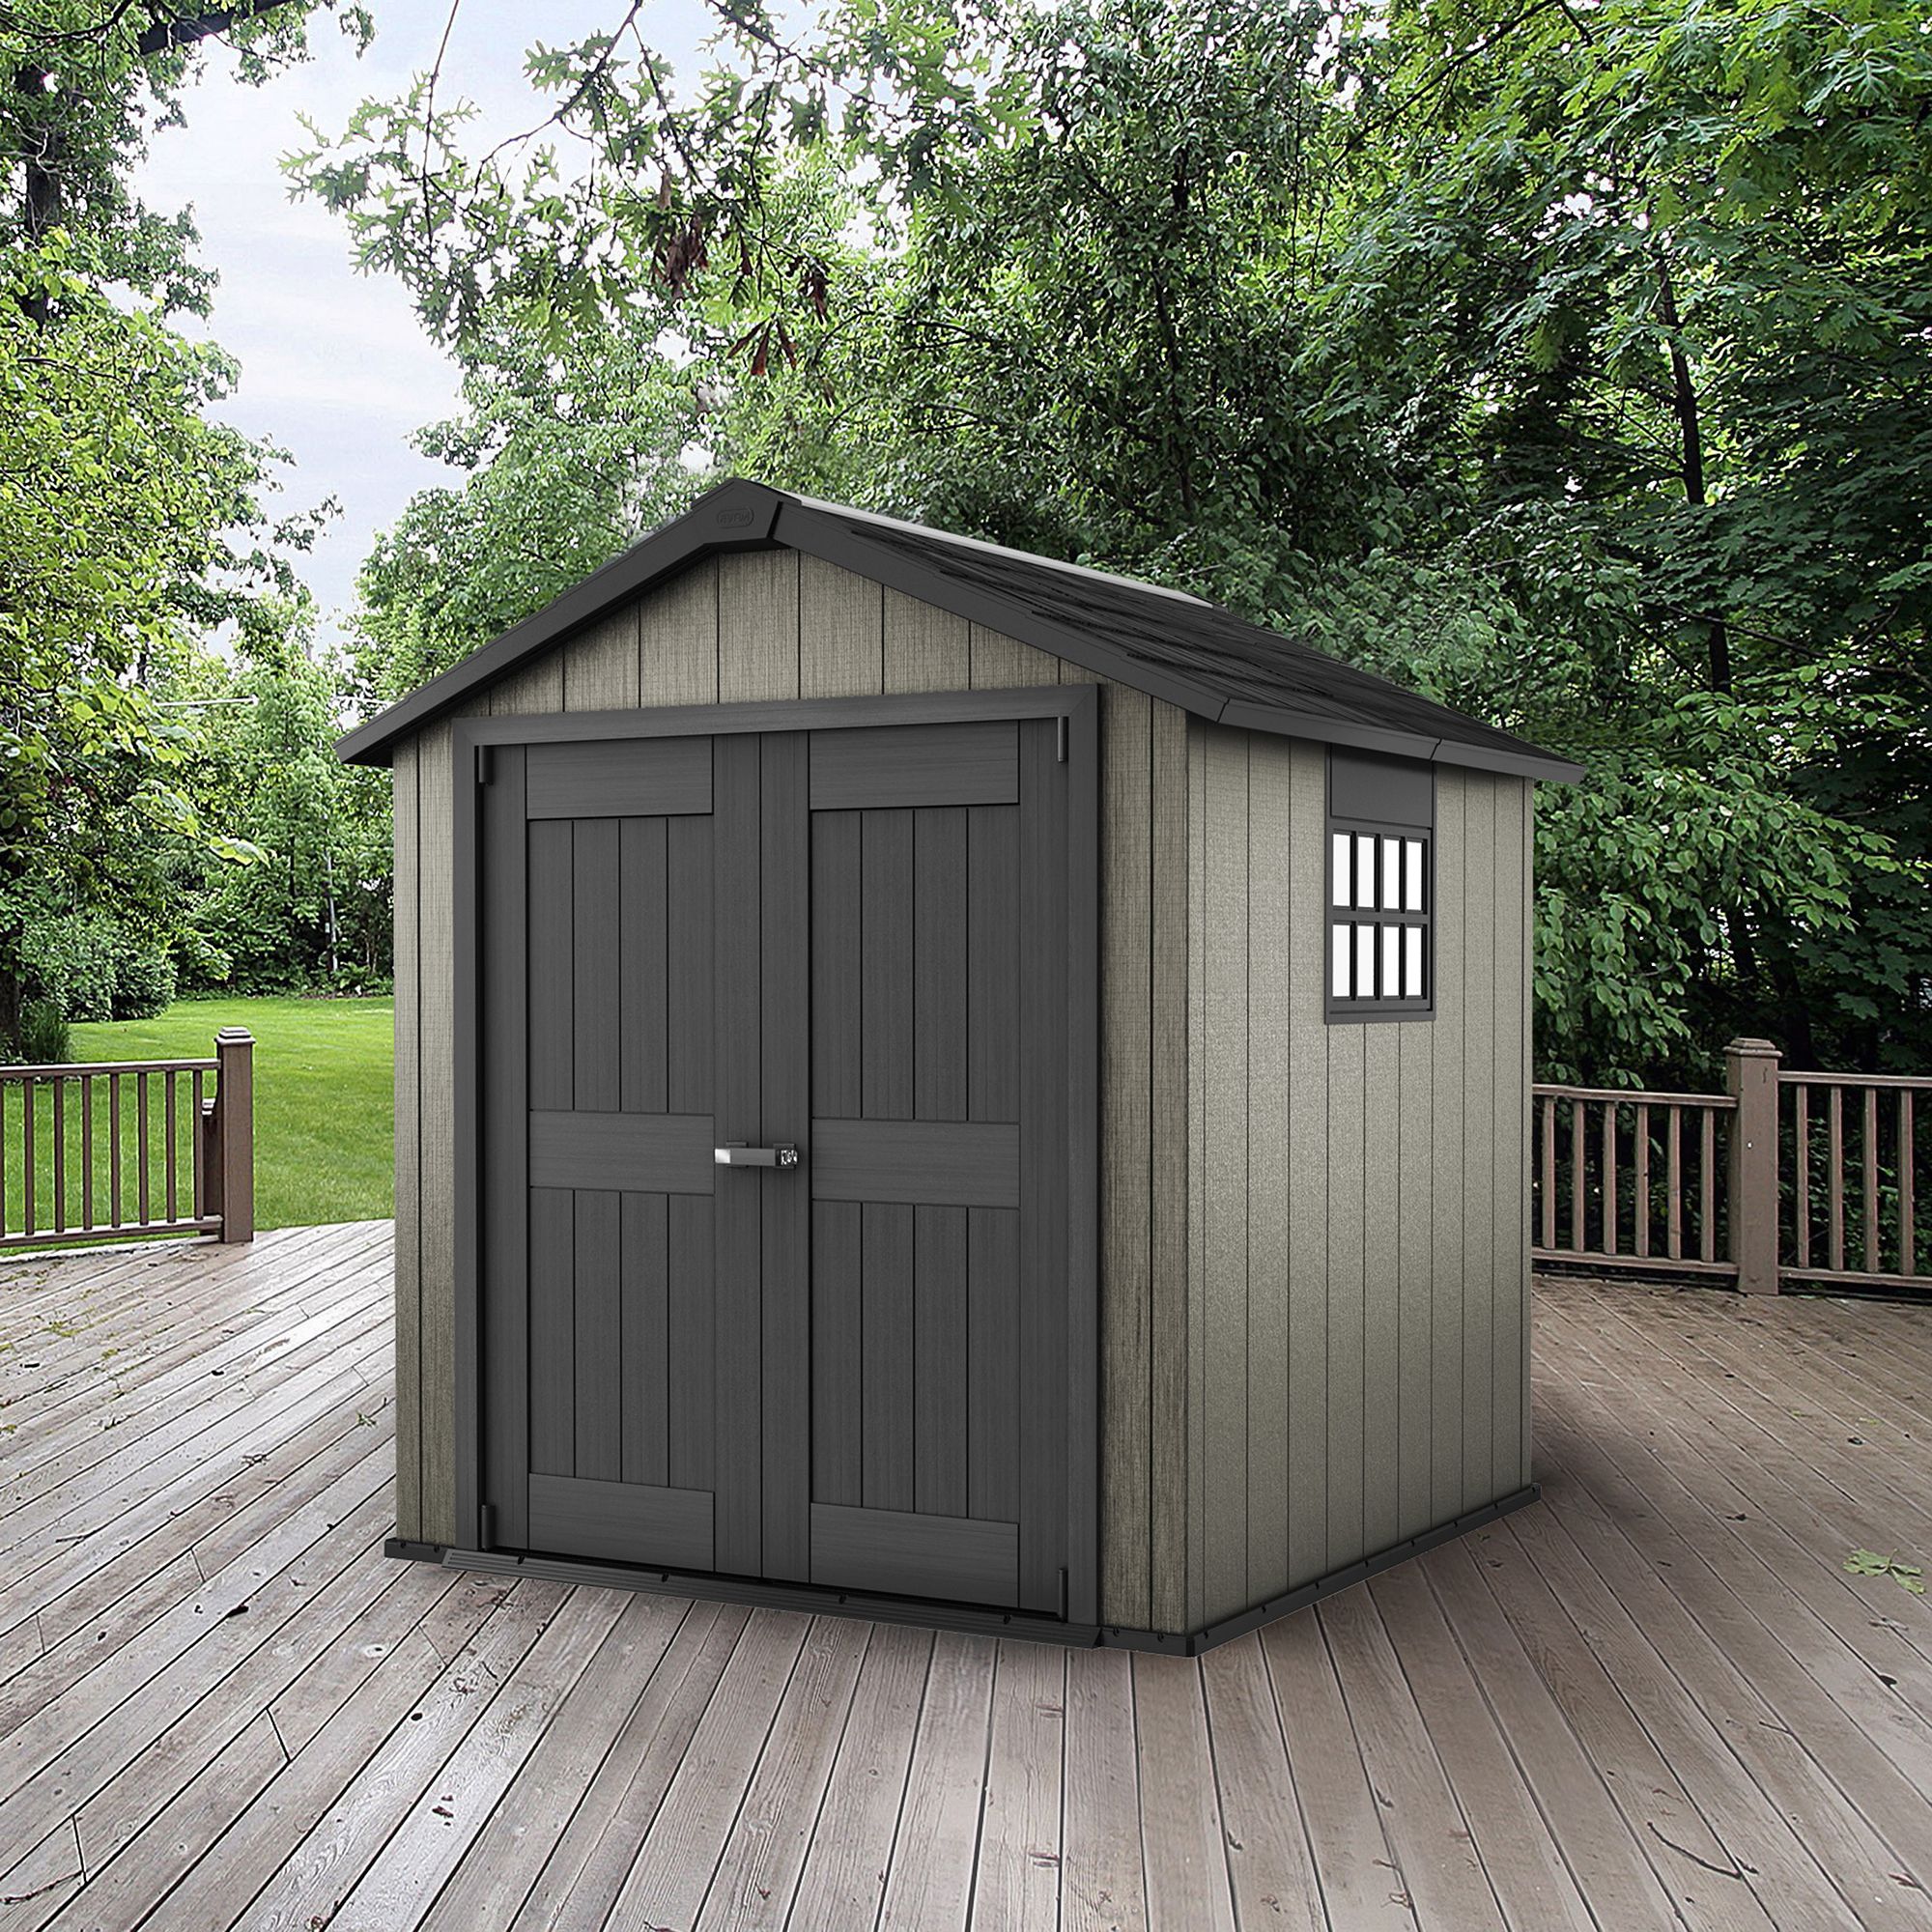 Sheds - Wooden, Metal &amp; Plastic B and Q Sheds